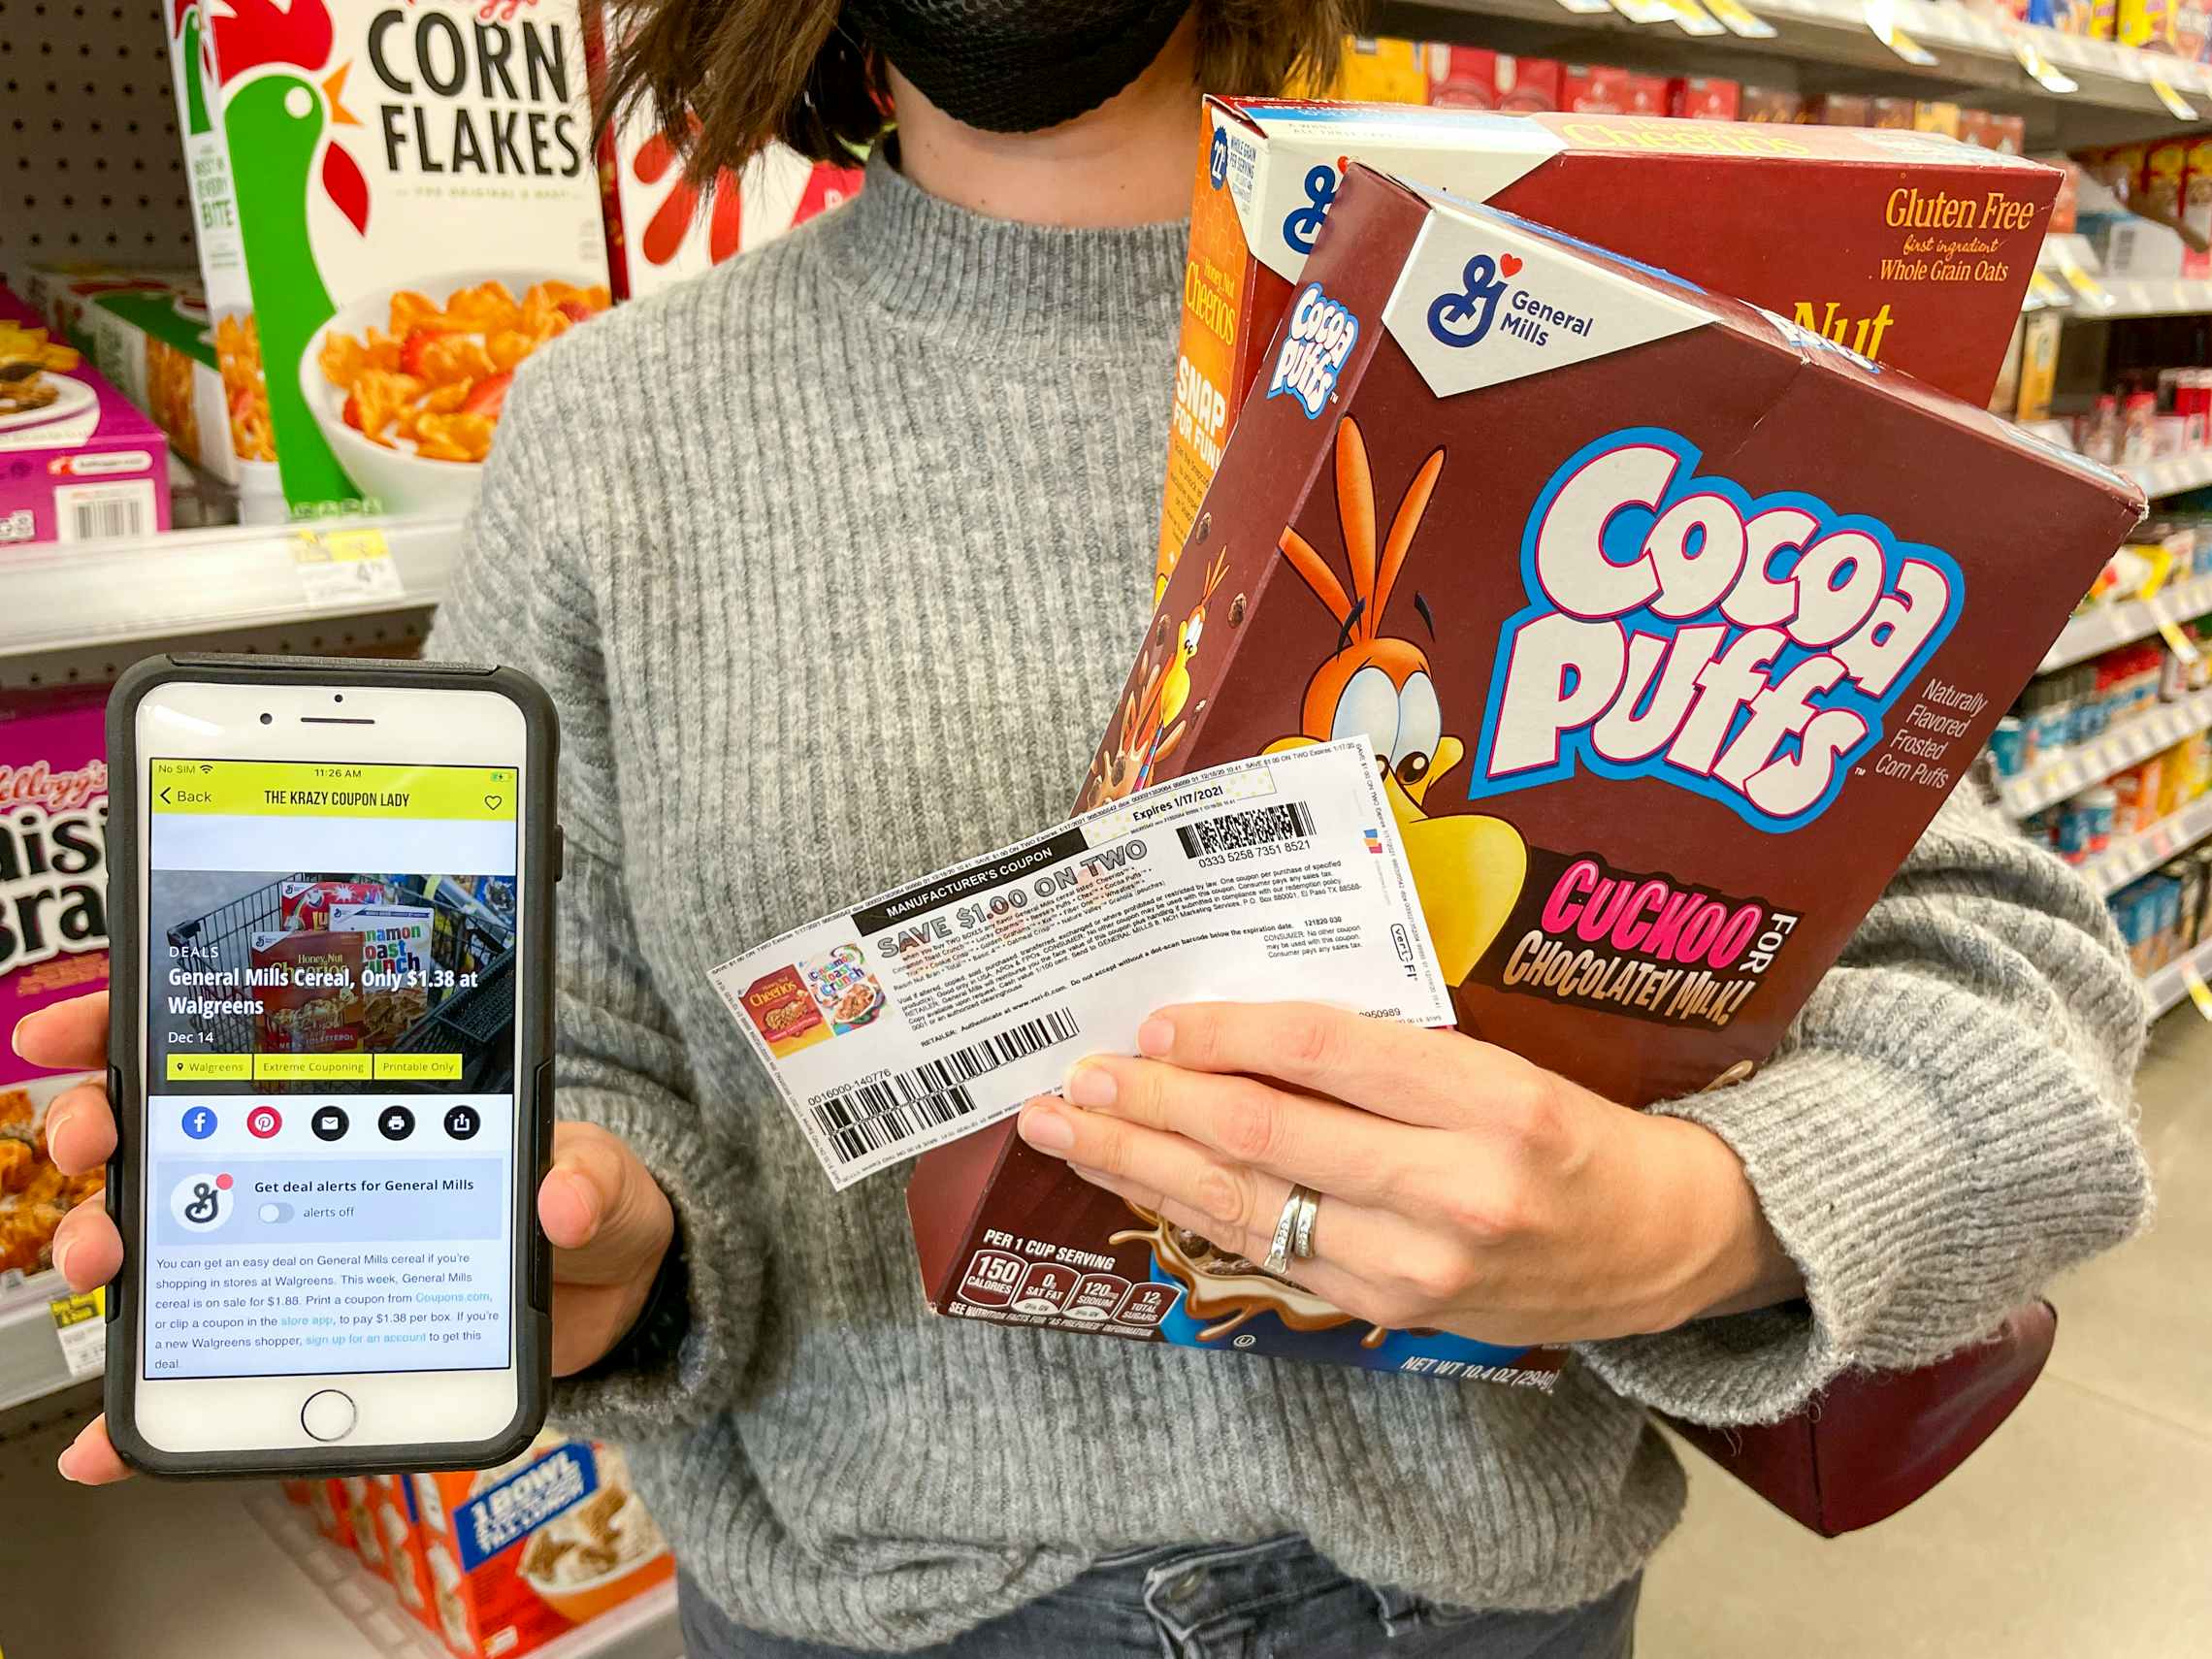 How to find and clip  instant coupons - CNET